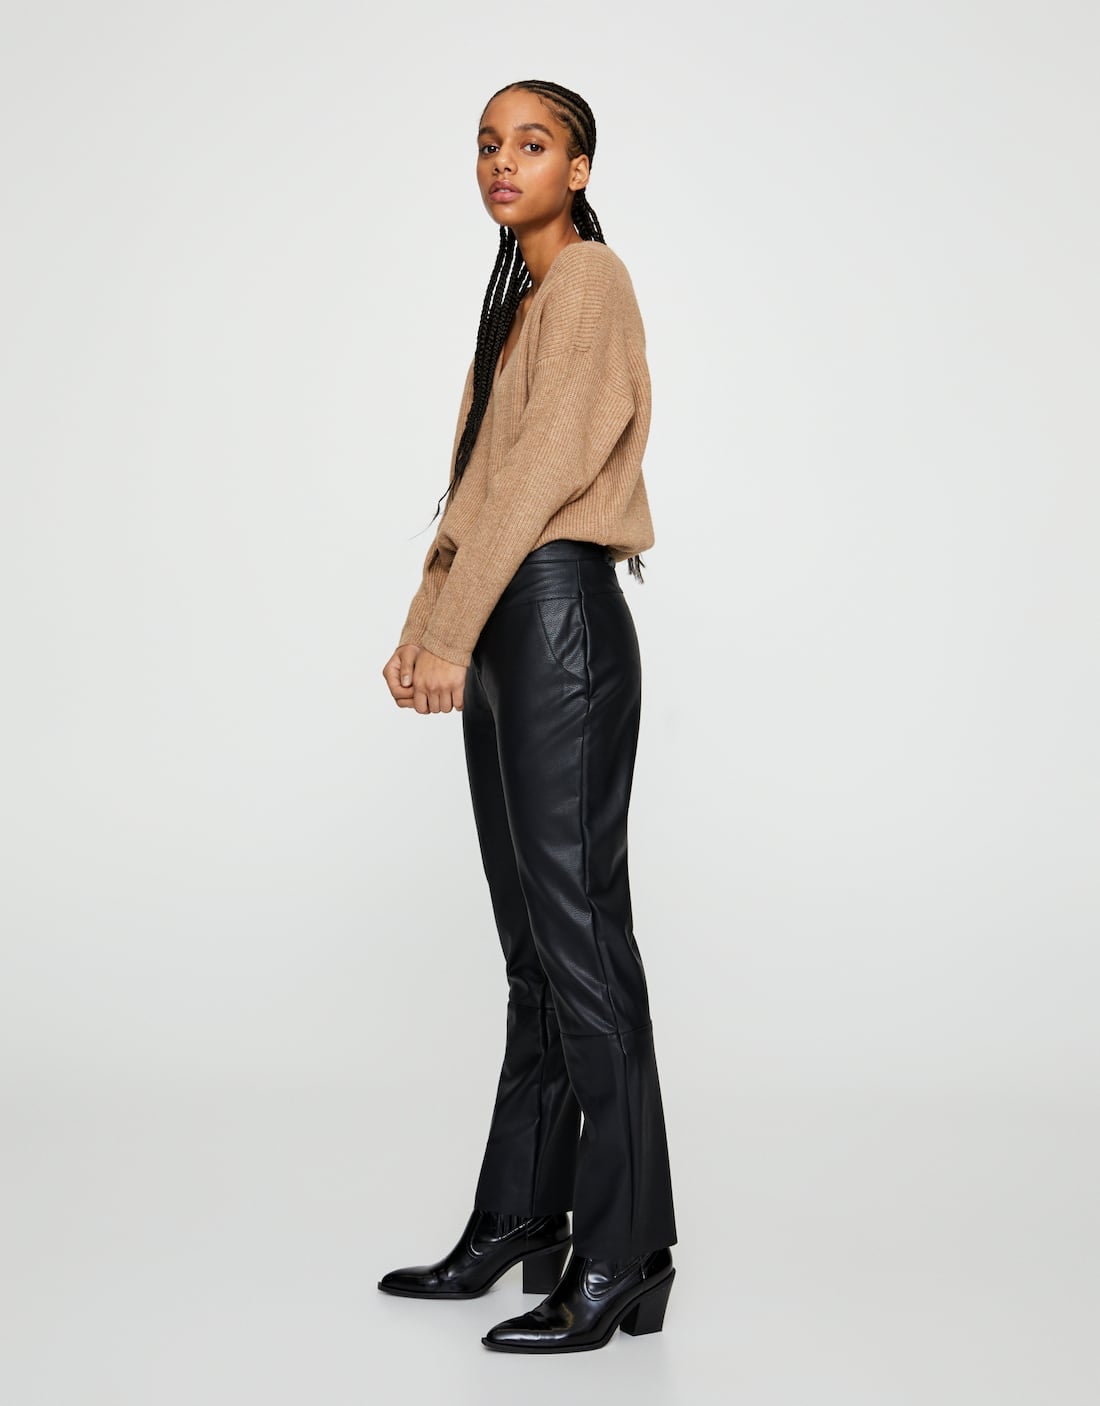 Pull&Bear faux leather pants in black, ASOS